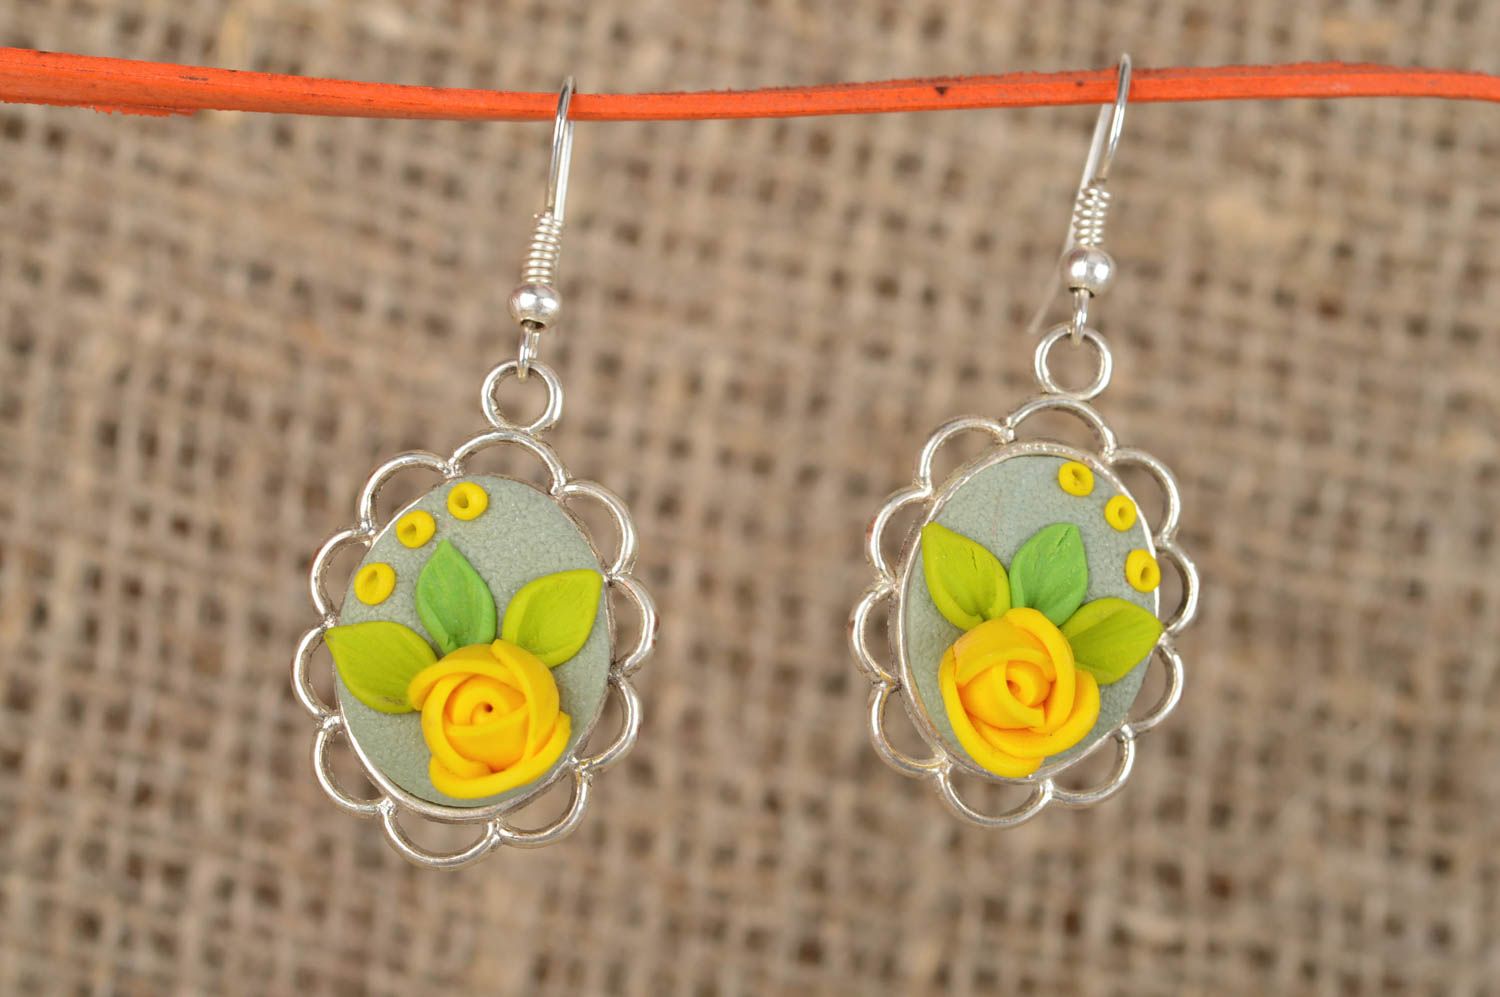 Small earrings with flowers made of polymer clay handmade summer accessory photo 1